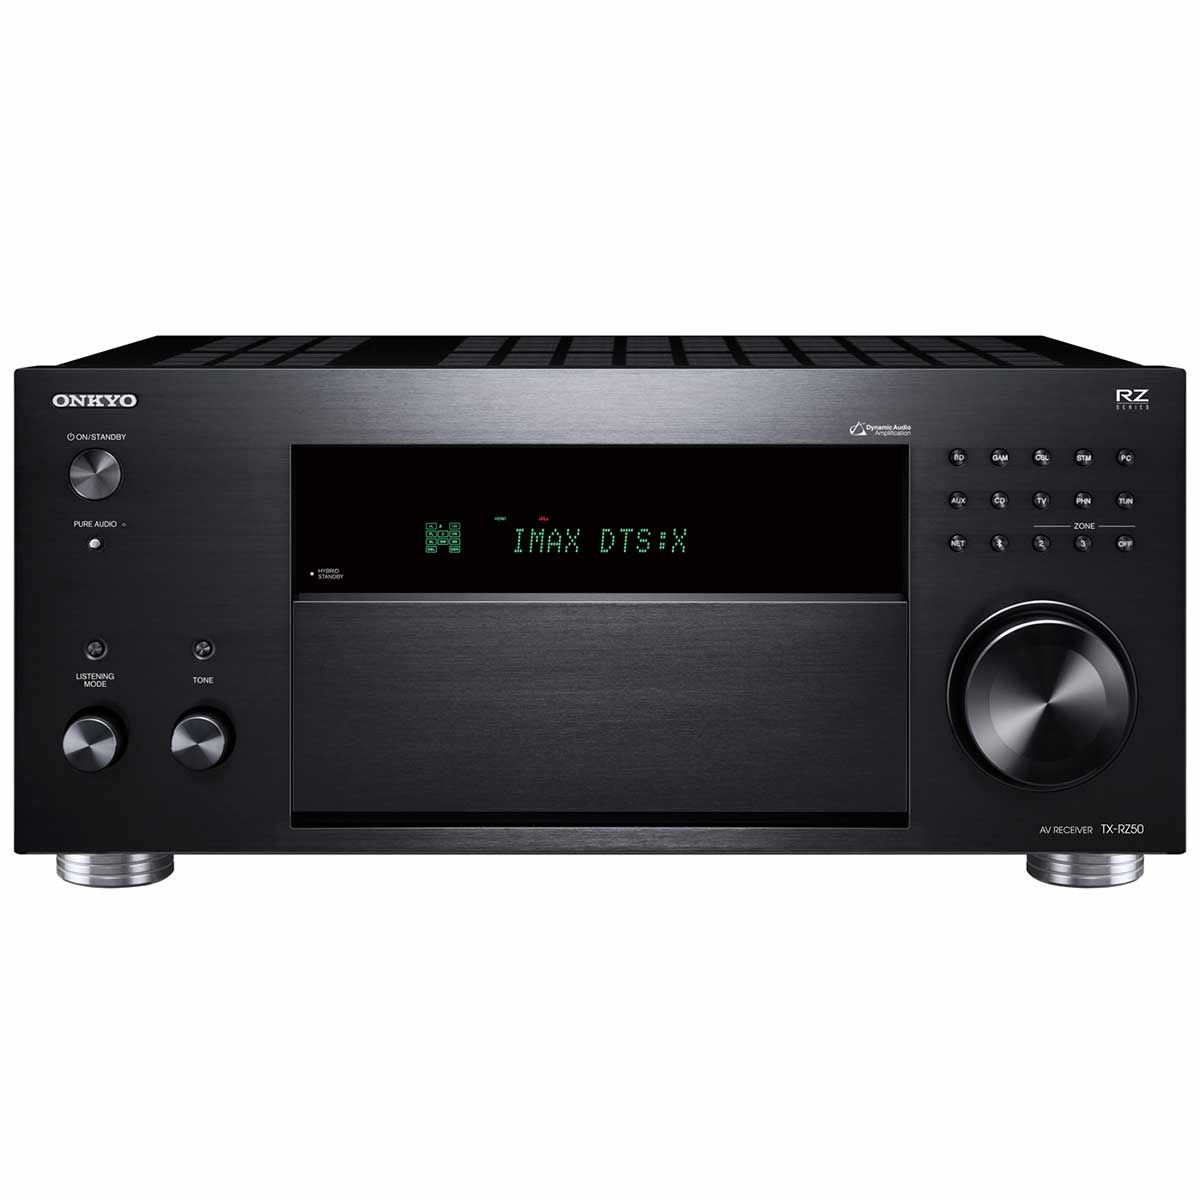 Onkyo TX-RZ50 Home Theater Receiver, front view